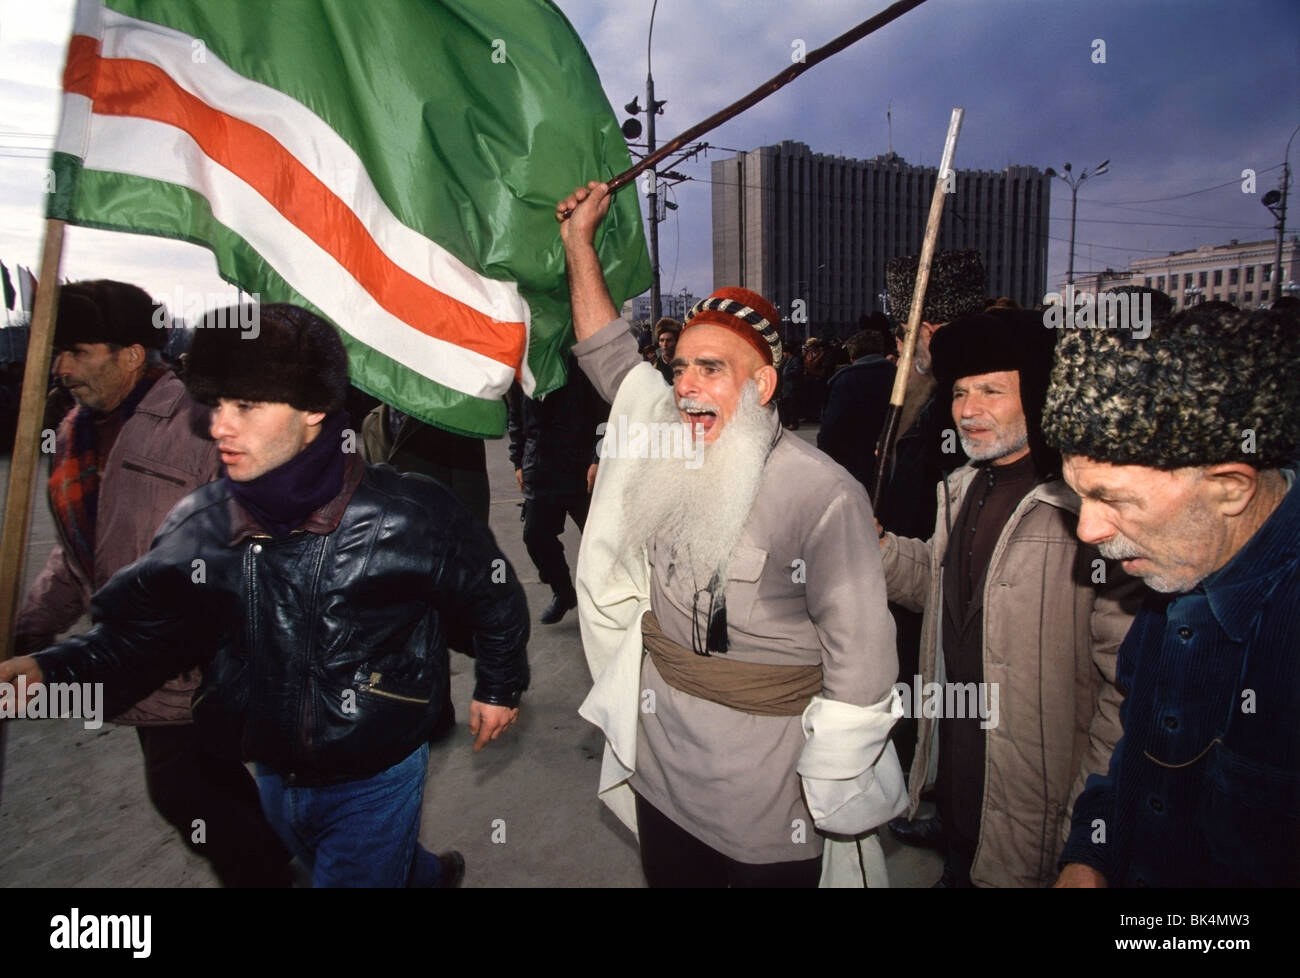 Chechen Dudayev supporters rally outside the 'Presidential Palace' in central Grozny, Chechnya. Stock Photo